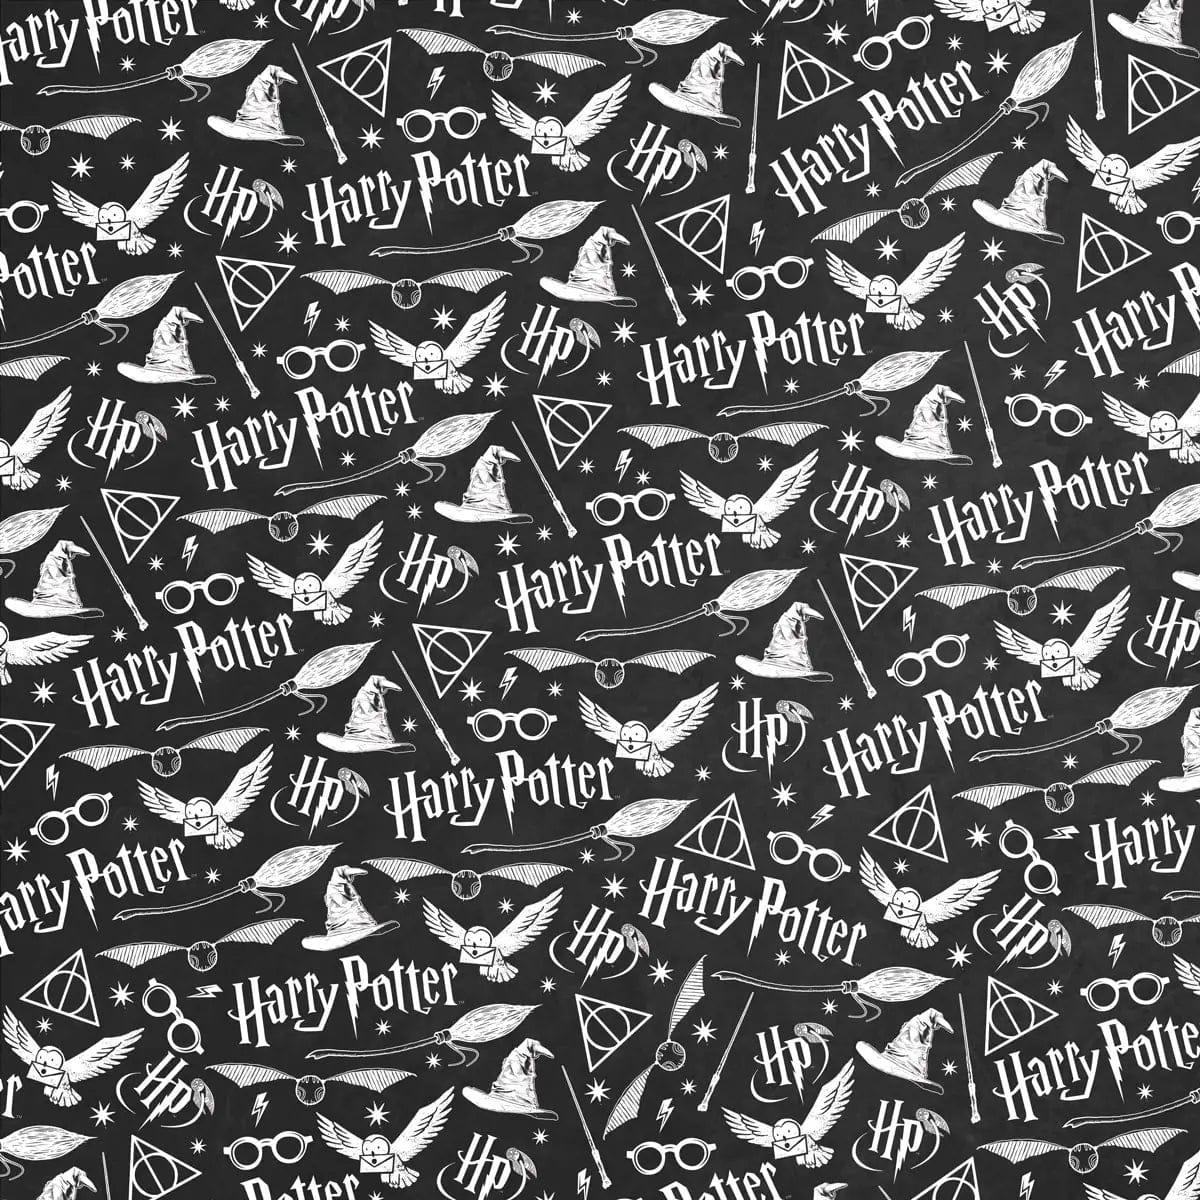 Harry Potter Collection Pattern 12 x 12 Double-Sided Scrapbook Paper by Paper House Productions - Scrapbook Supply Companies